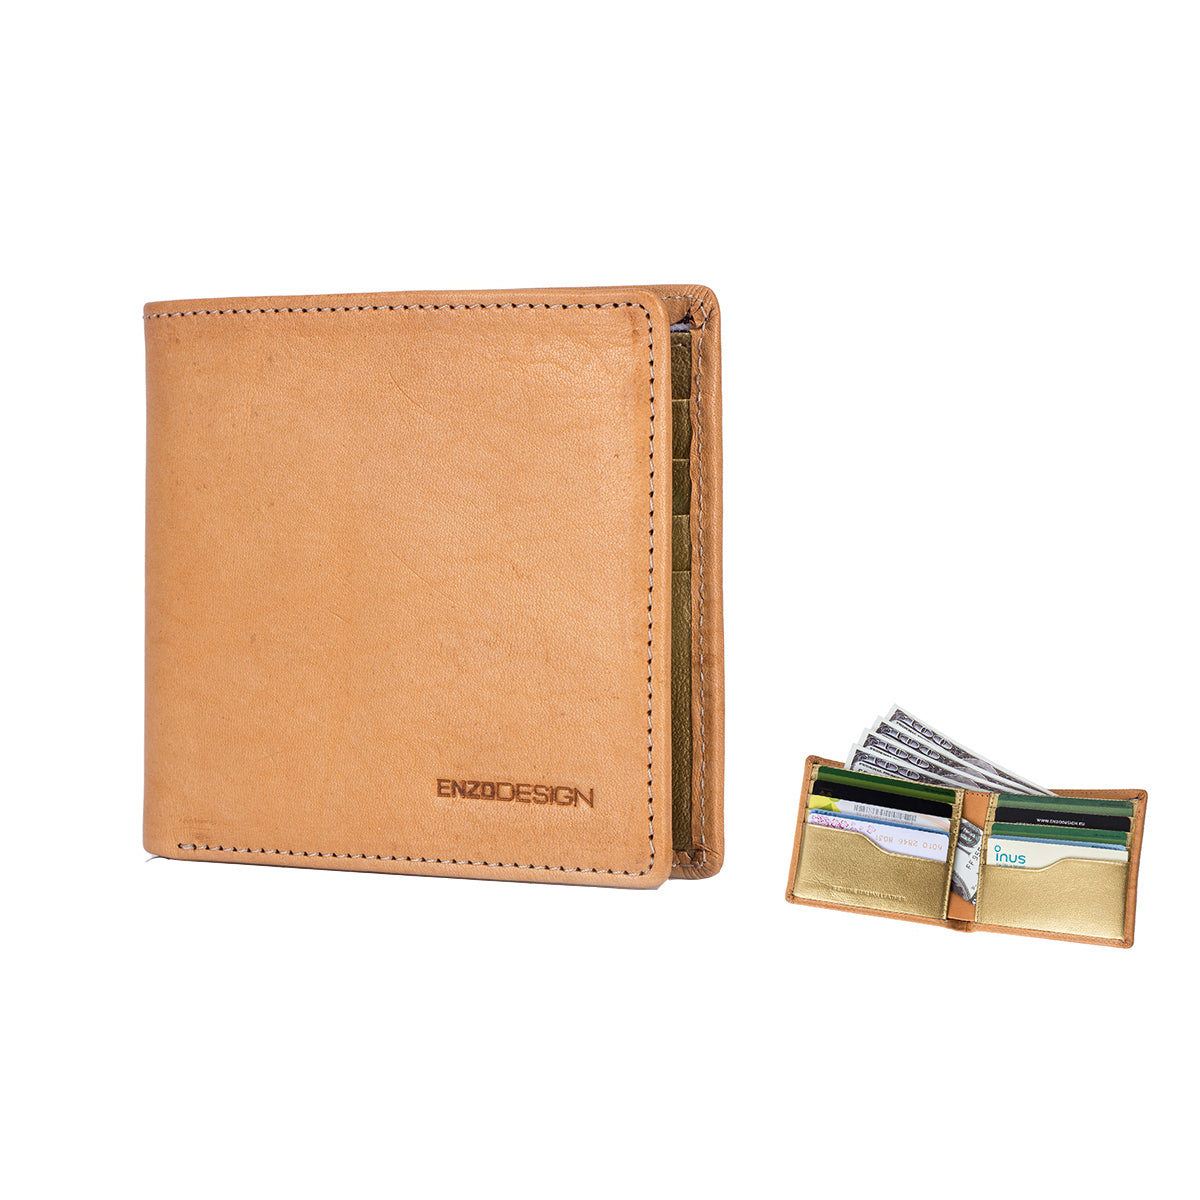 EnzoDesign Tan / Gold Cowhide Leather Wallet